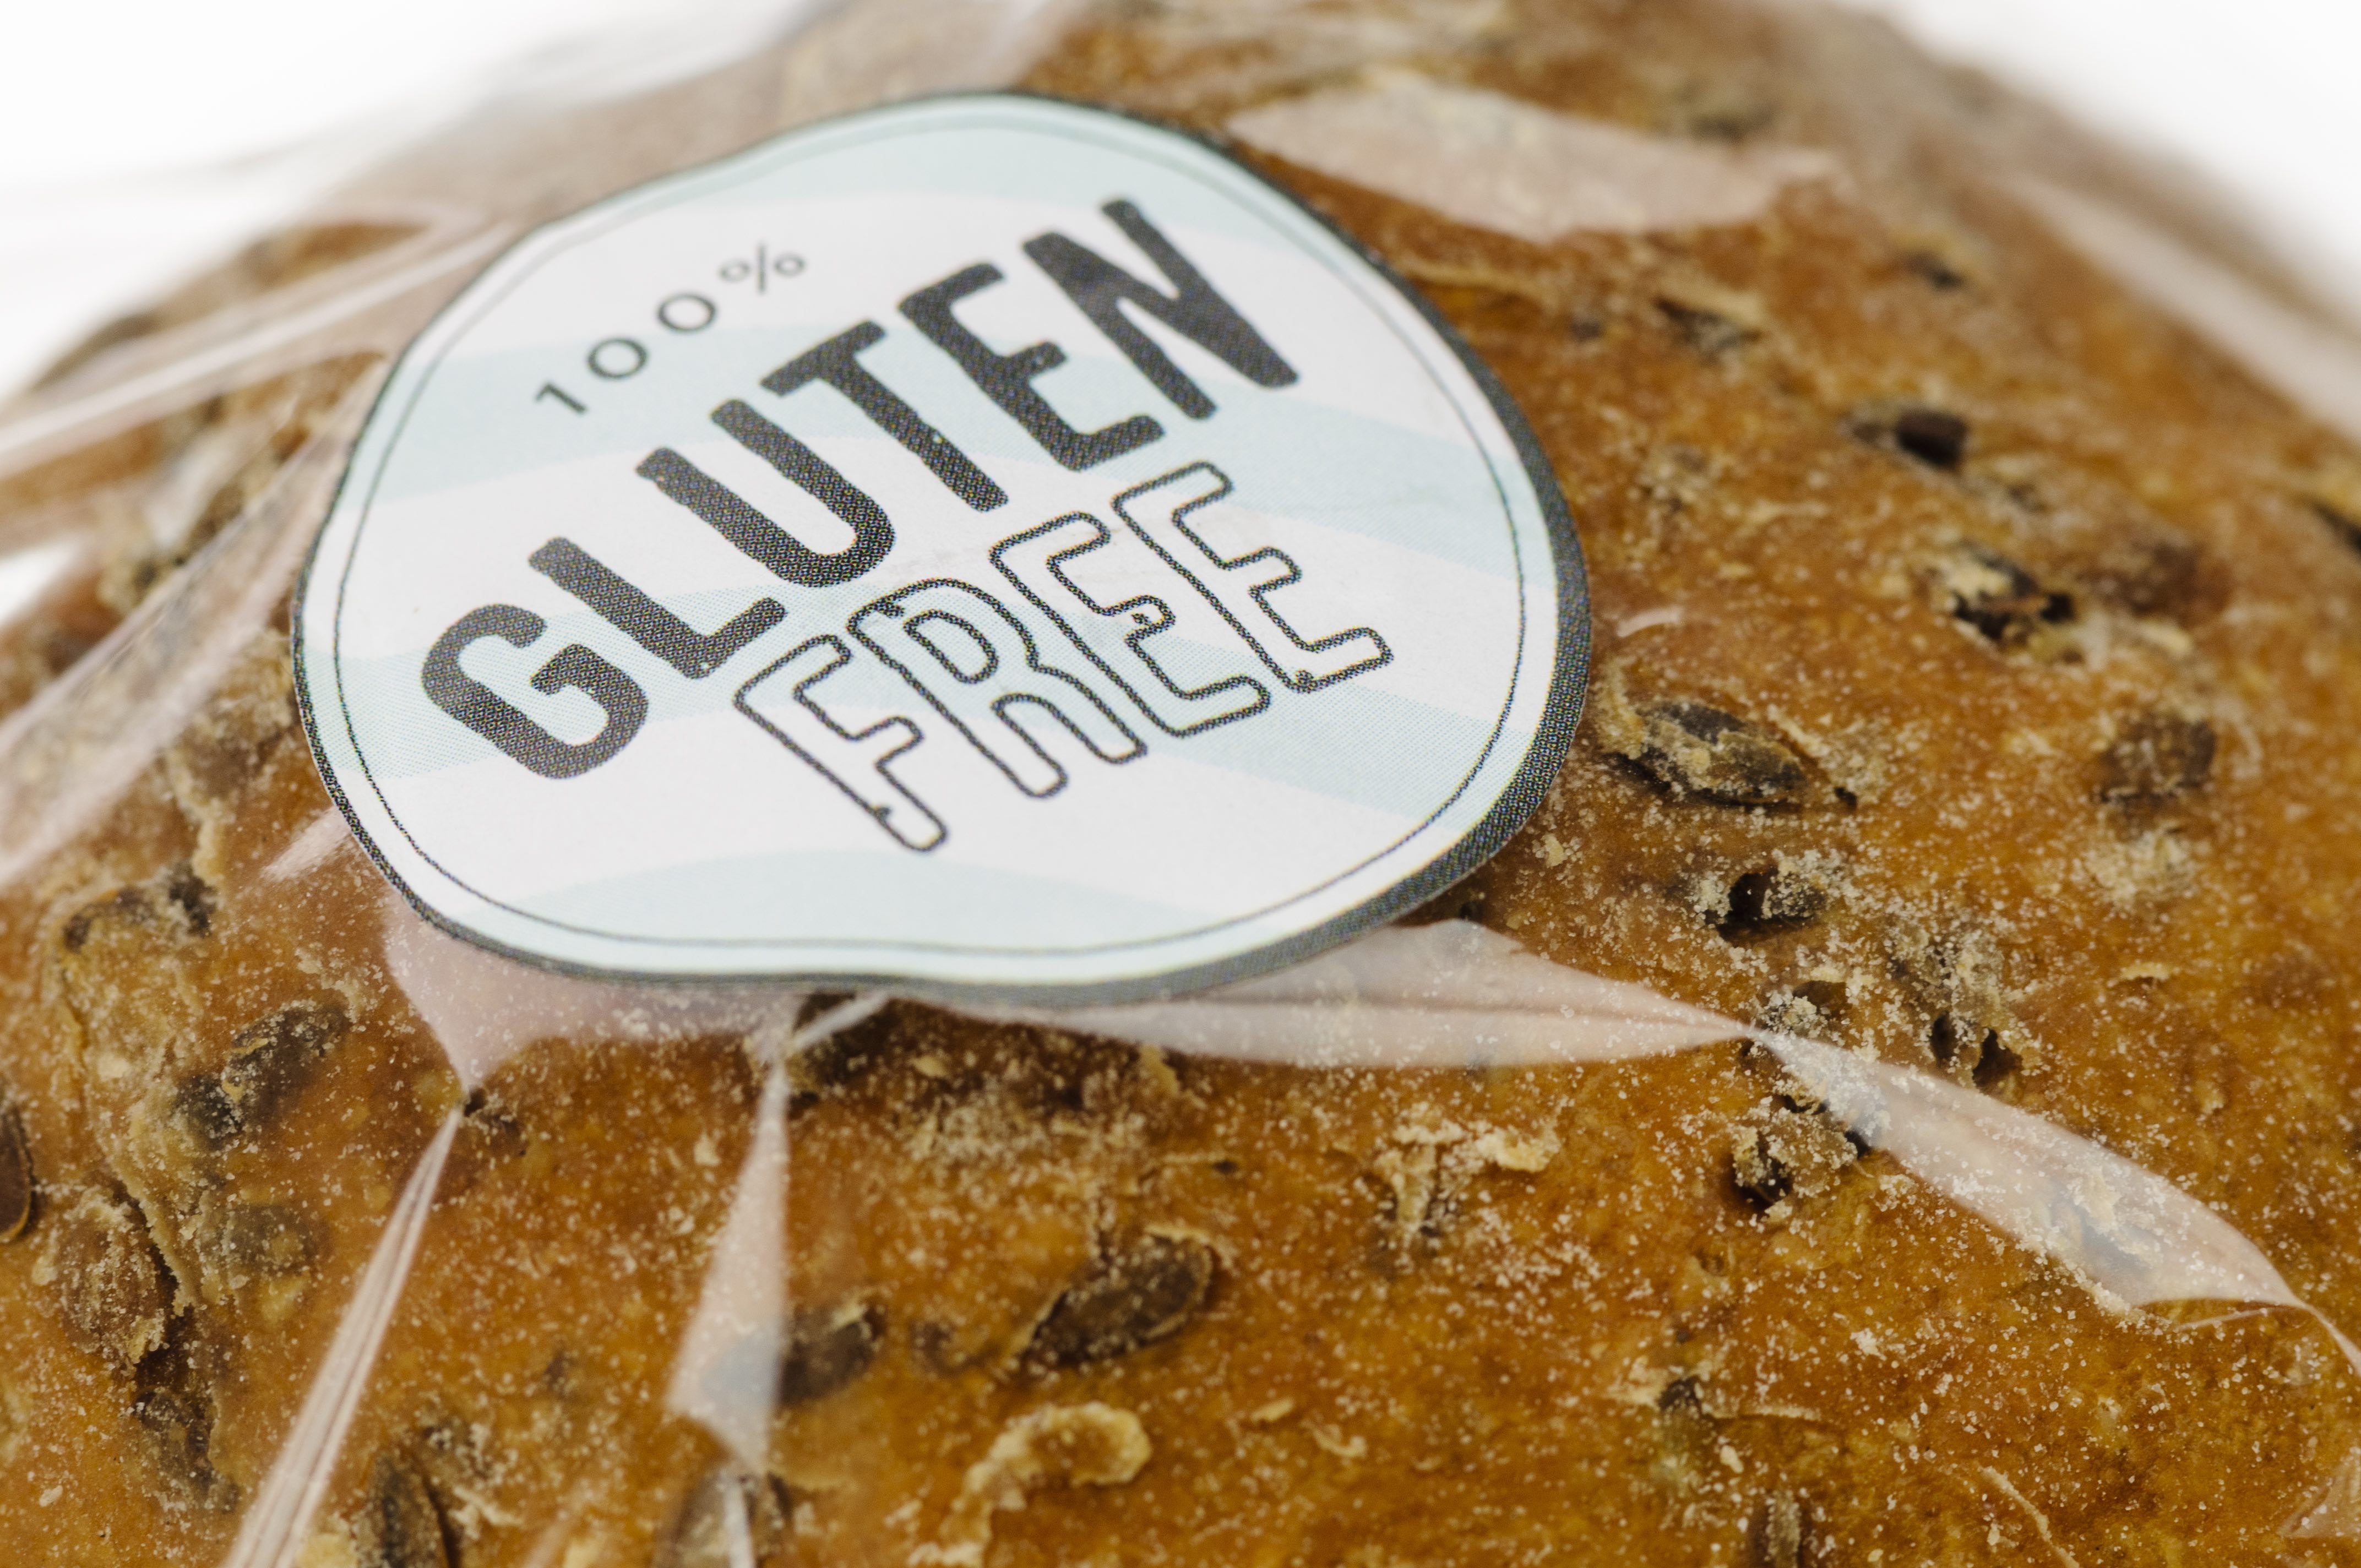 Top tips for adapting to a gluten-free lifestyle